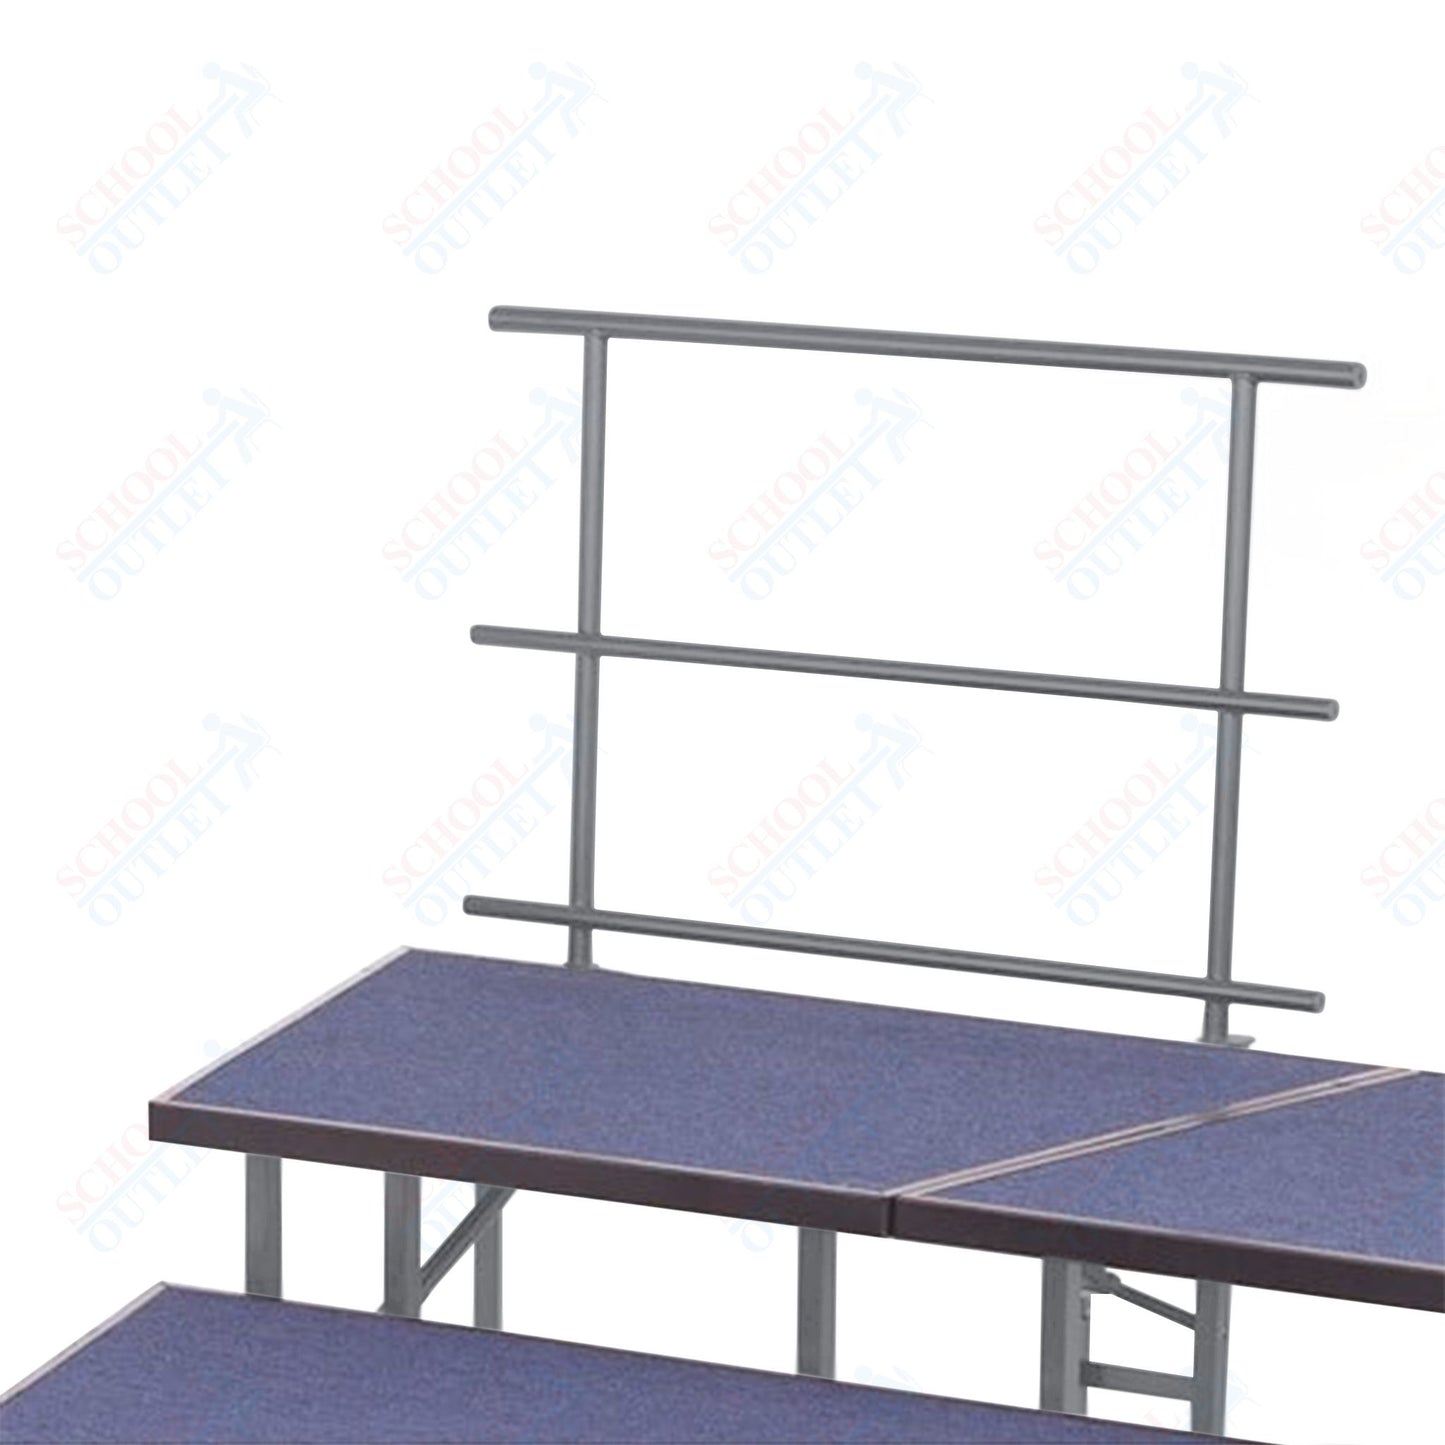 AmTab Stage and Riser Guard Rail - Chair Stop - 25"W x 31" H  (AmTab AMT-STGR25)